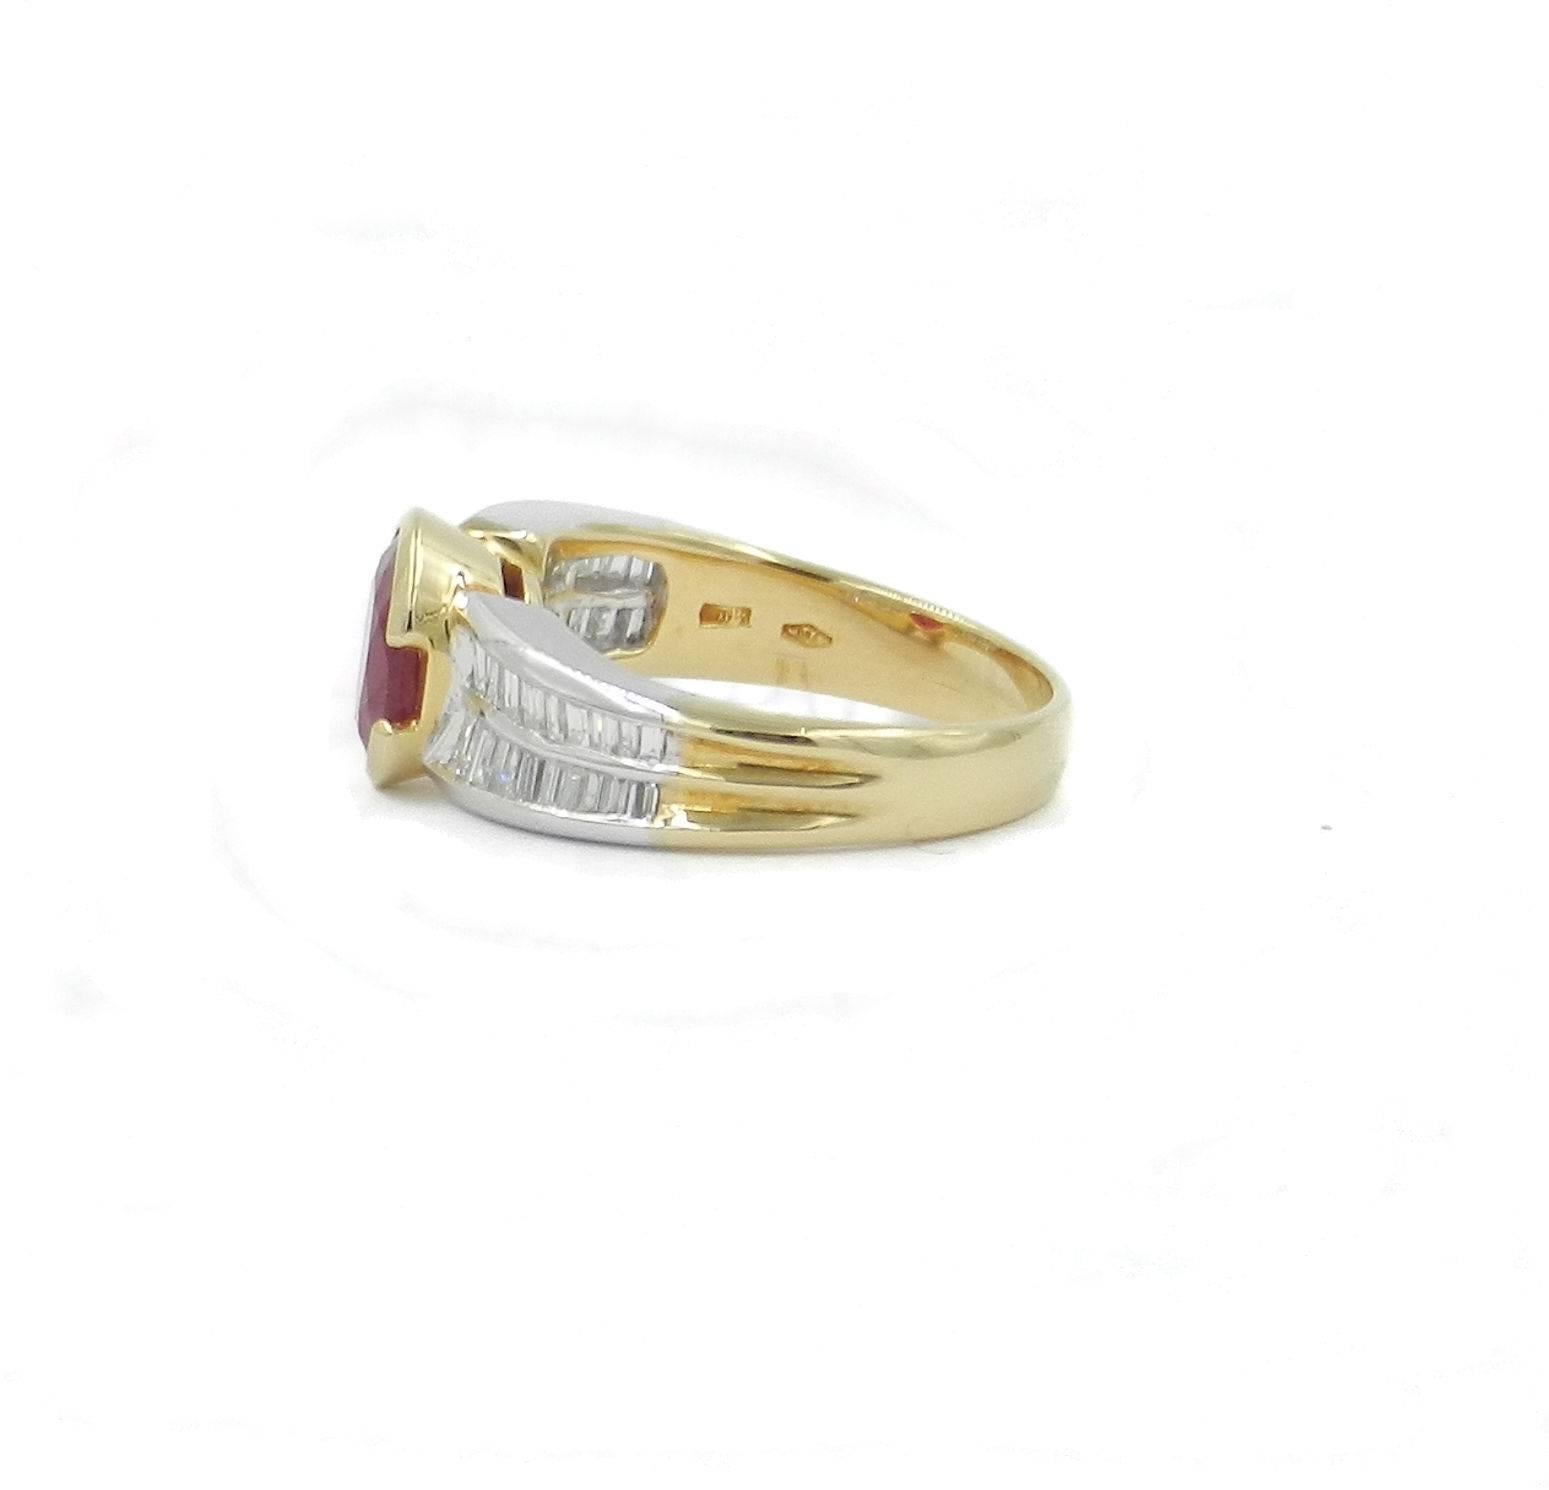 Ring in 18kt yellow and white gold with very nice natural oval shape ruby weight carat 1.93 and baguette cut diamonds total weight 0.82 carat
A classical style to wear. Circa 1960. Ring size 54.5